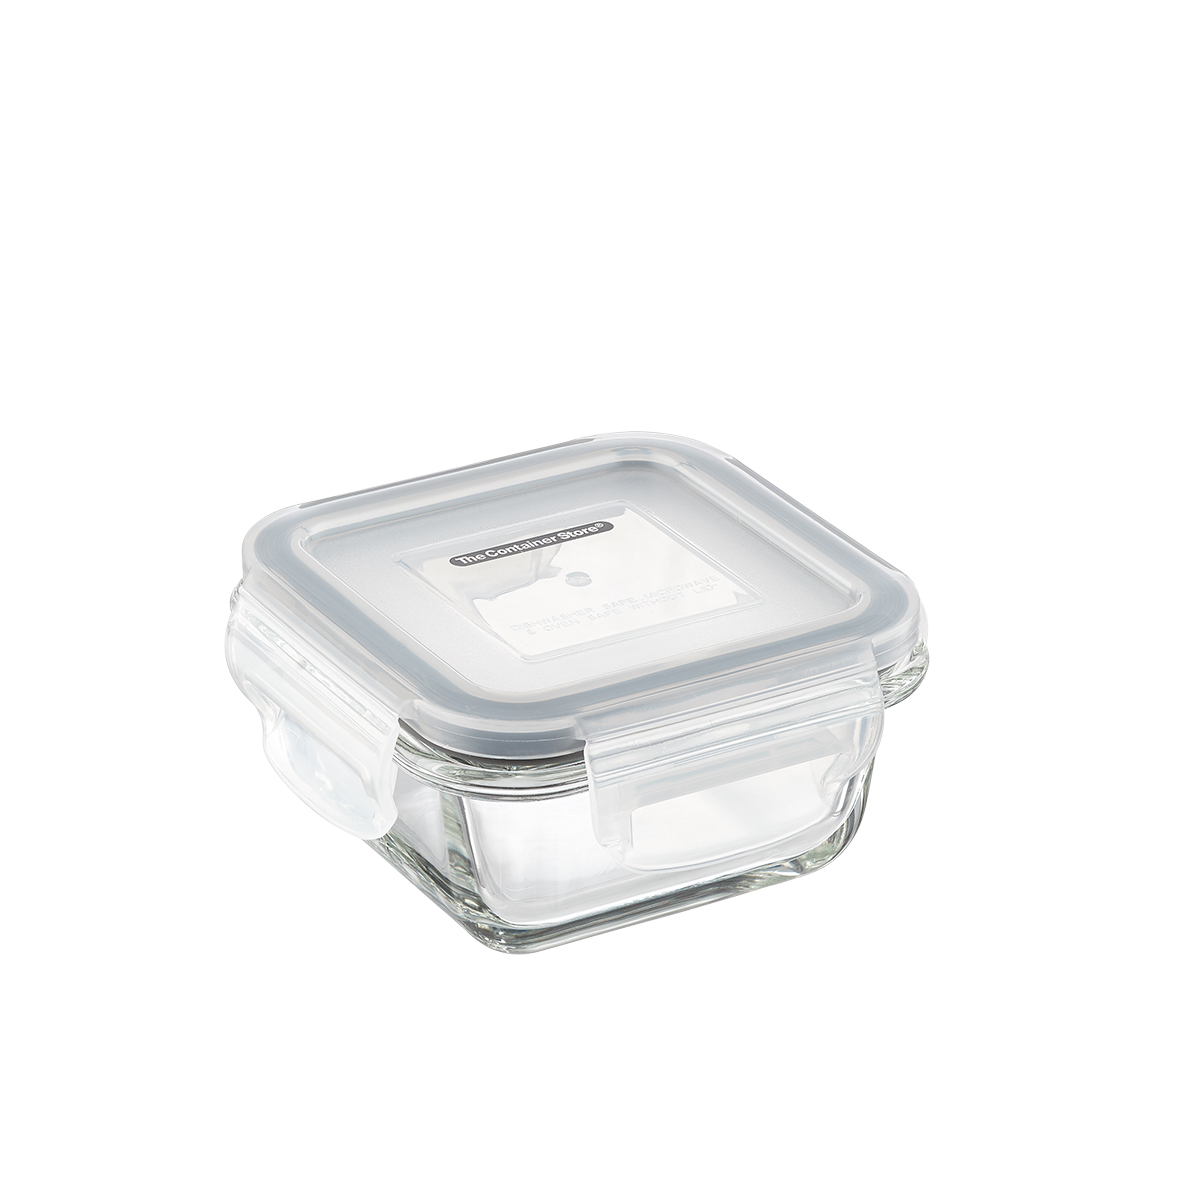 https://www.containerstore.com/catalogimages/383234/10079290-borosilicate-food-storage-s.jpg